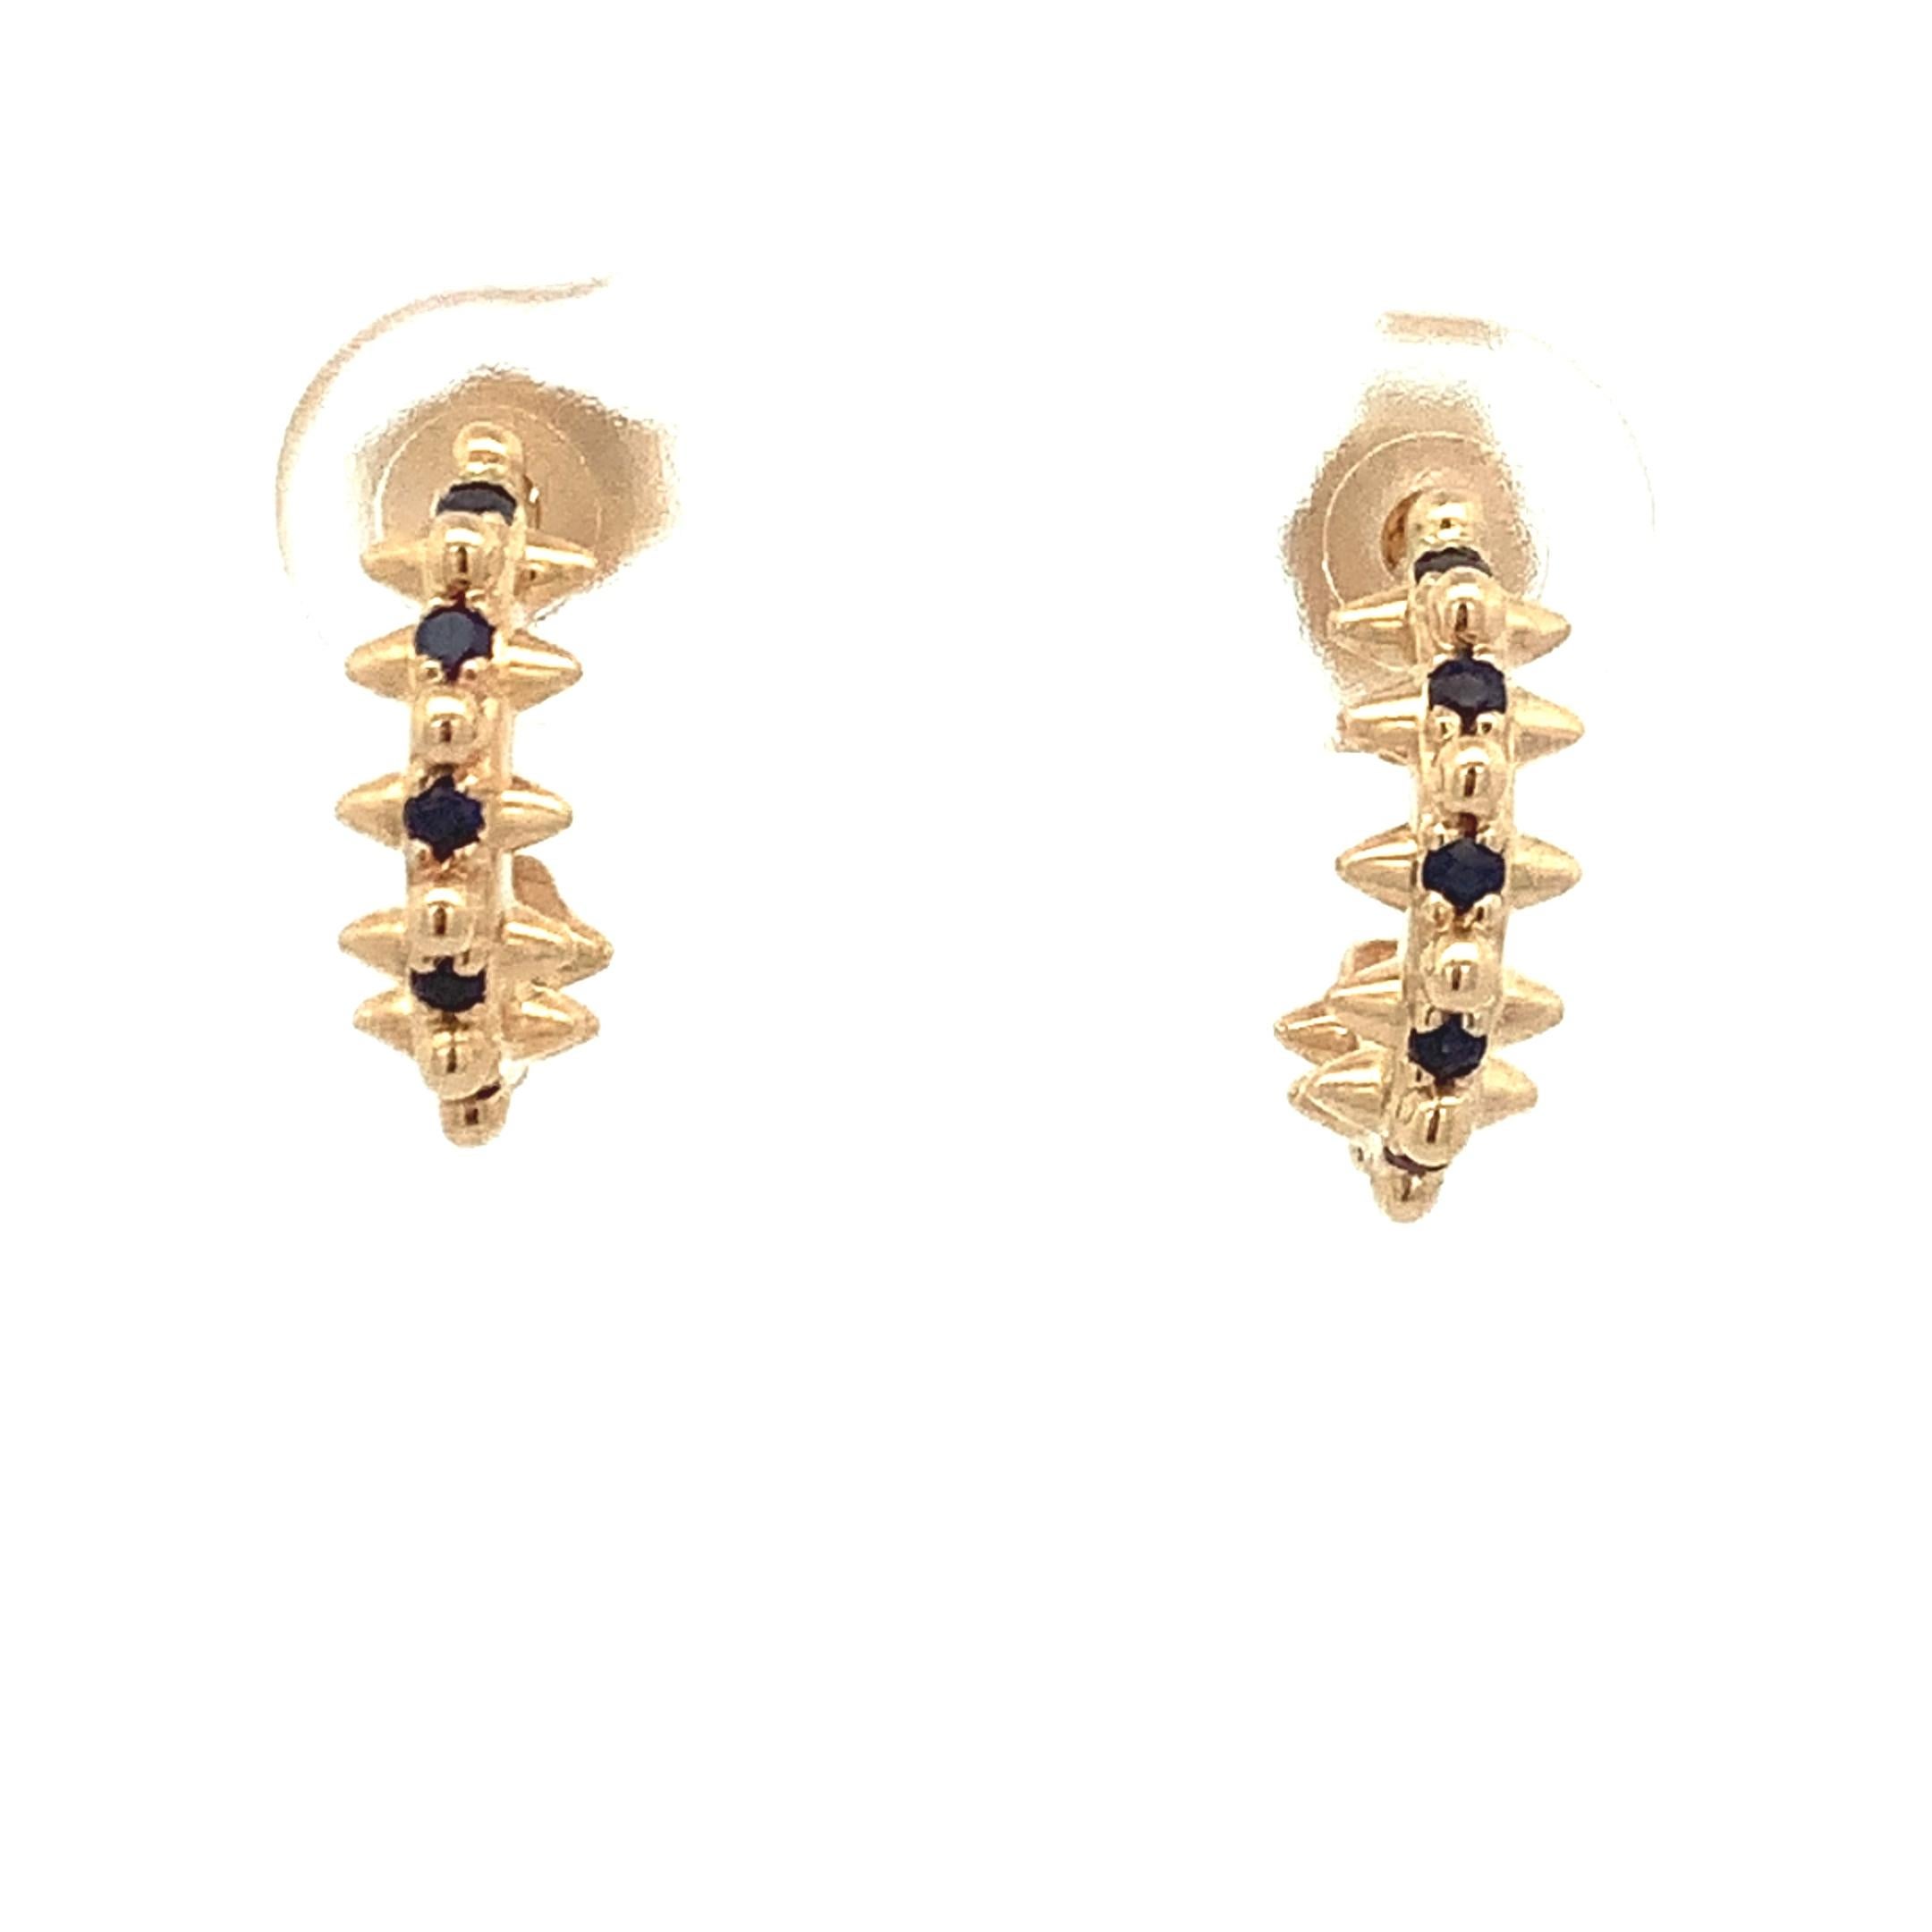 Adina Reyter One of a Kind Small Sapphire Spike Hoops

14k yellow gold spike hoop earrings. 

Hoop measures approximately 3.3mm x 1.9mm, with an outside diameter of 12mm. 

Pictured in second hole.